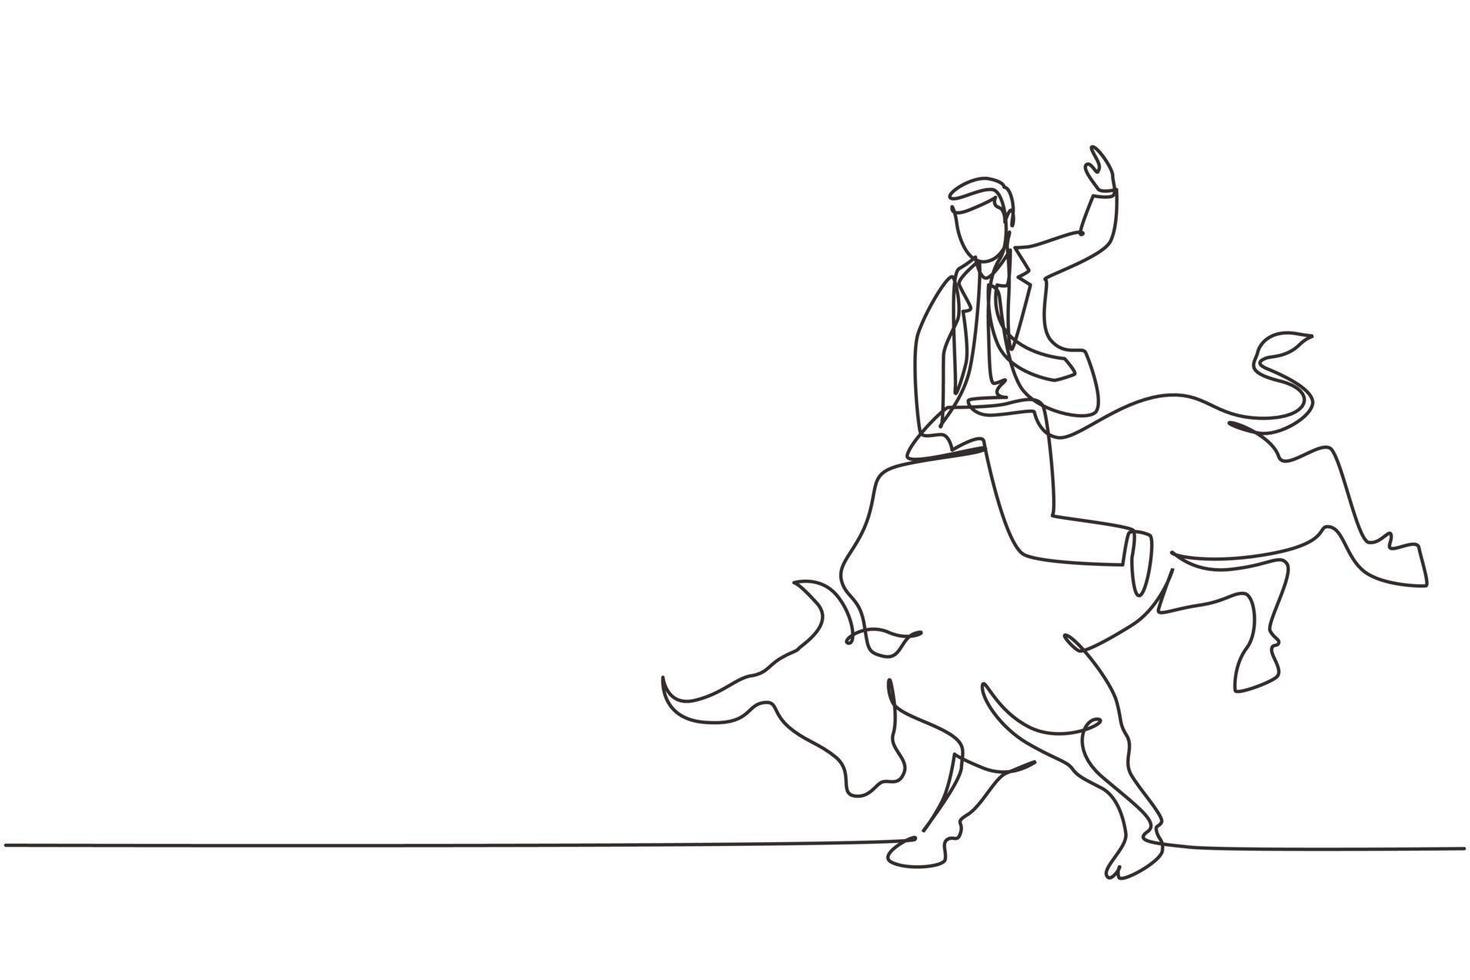 Continuous one line drawing businessman riding unicorn bull. Investment, bullish stock market trading, rising bonds trend. Successful business man. Single line draw design vector graphic illustration